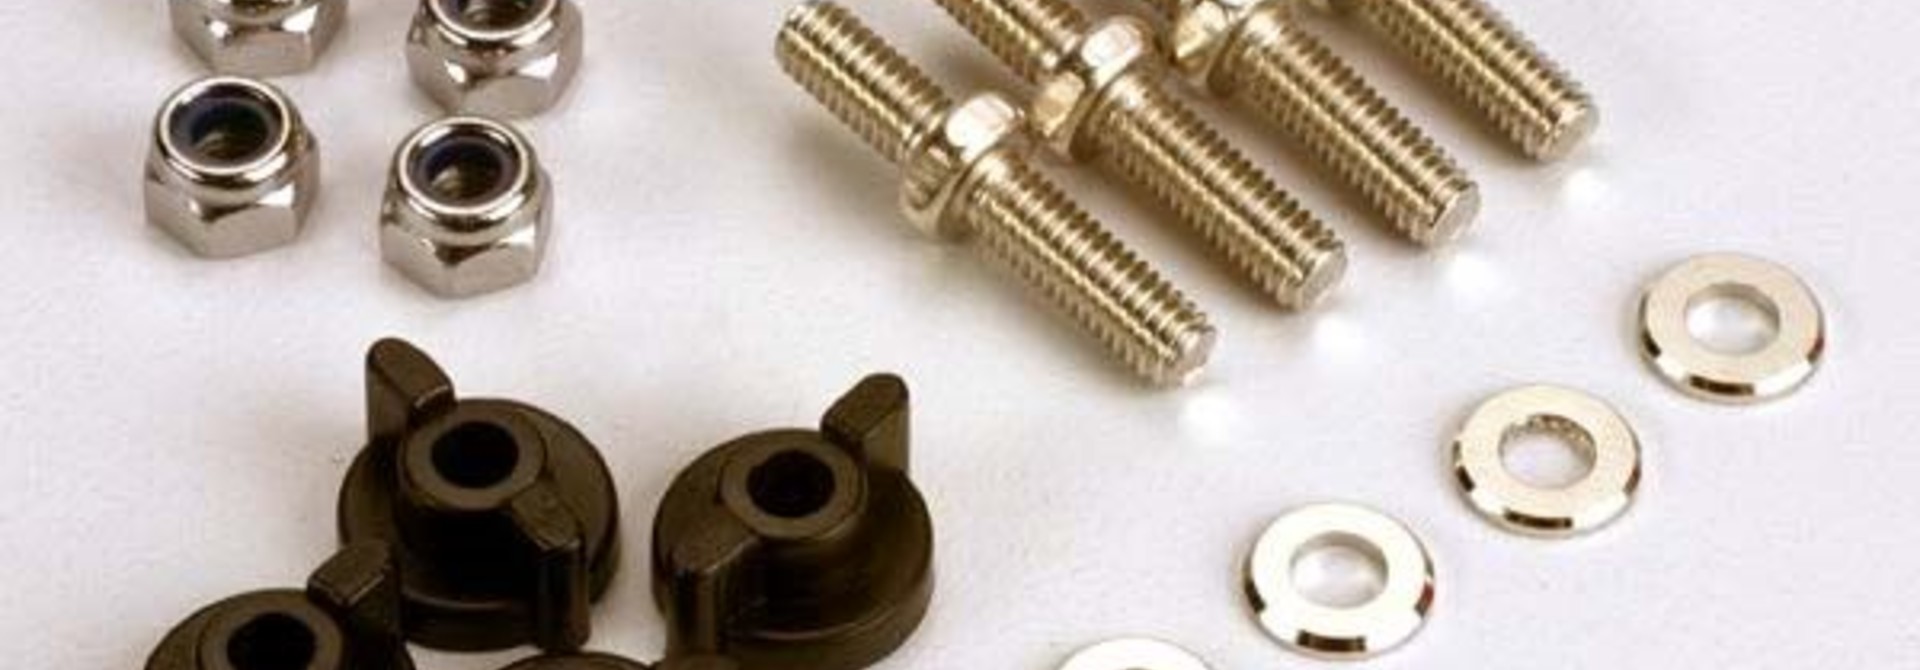 Anchoring pins with locknuts (4)/ plastic thumbscrews for up, TRX1516